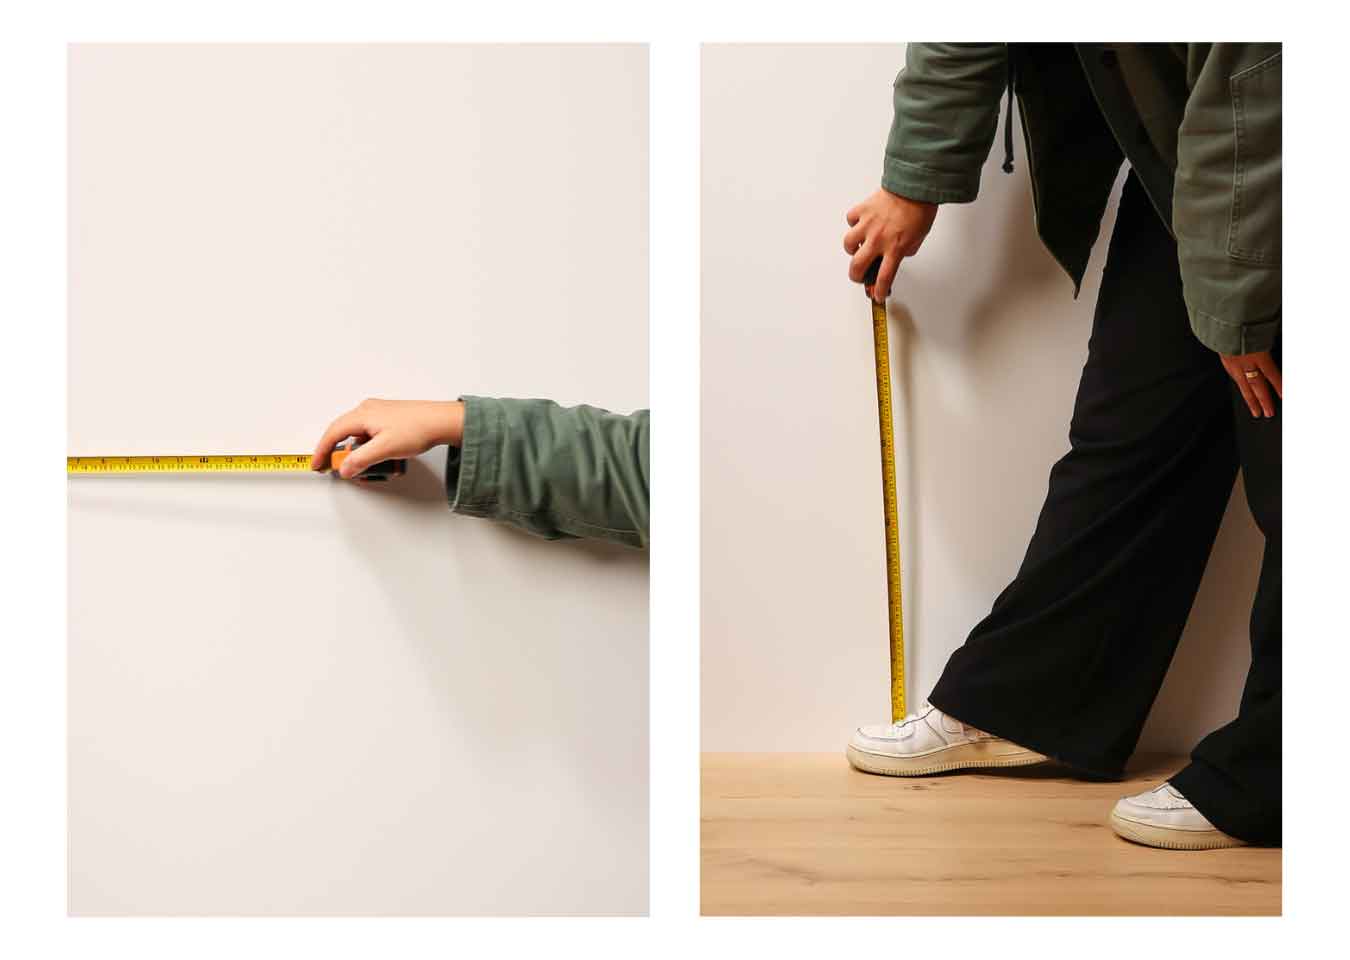 A person wearing a green jacket, black trousers and white trainers measuring a wall with a yellow measuring tape.